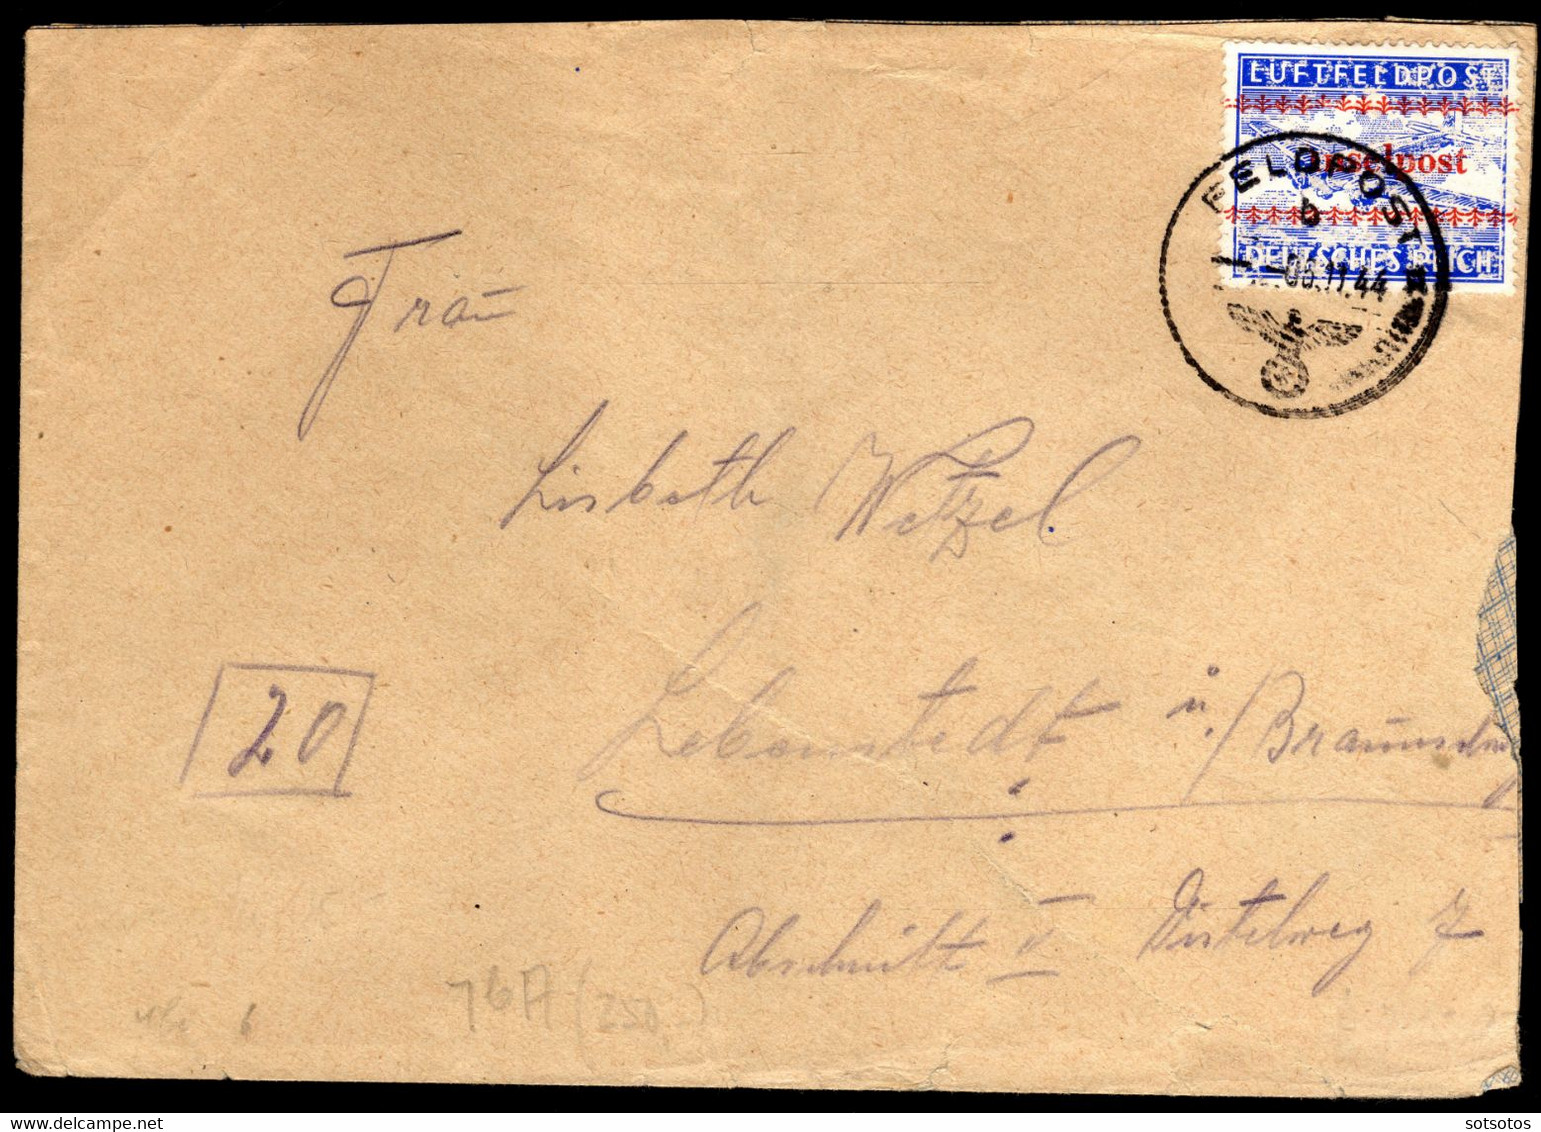 CRETE 5.11.1944: GERMAN OCCUPATION Surcharged INSELPOST German Air Post Stamp On Cover (M #7 - Hellas #1)  Extremely Rar - Kreta